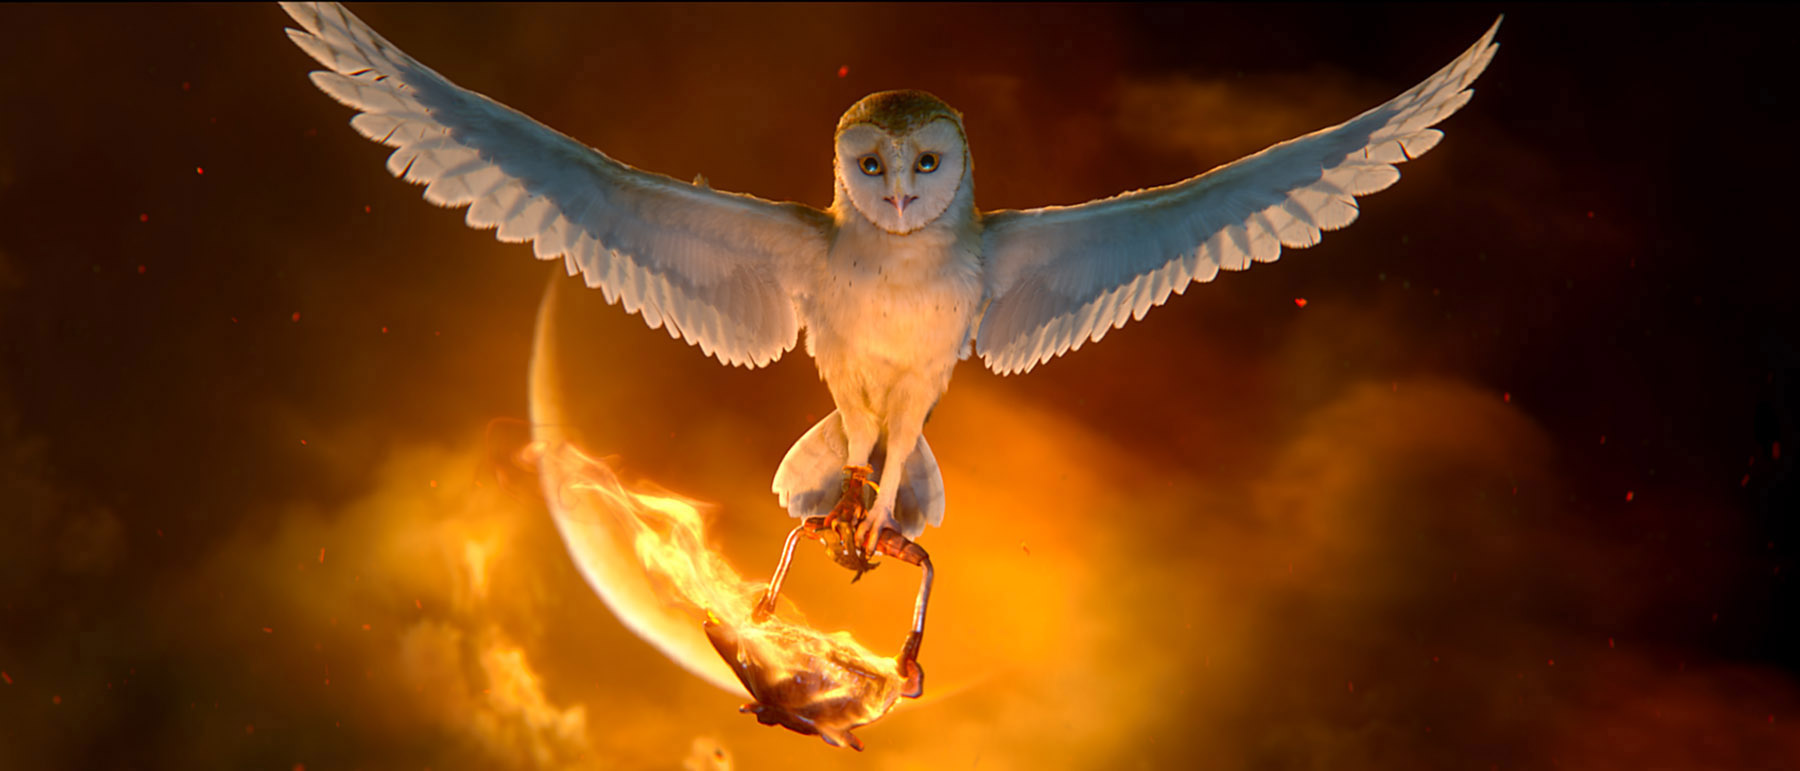 Soren (voiced by Jim Sturgess) in The Legend of the Guardians: The Owls of Ga'Hoole (2010)